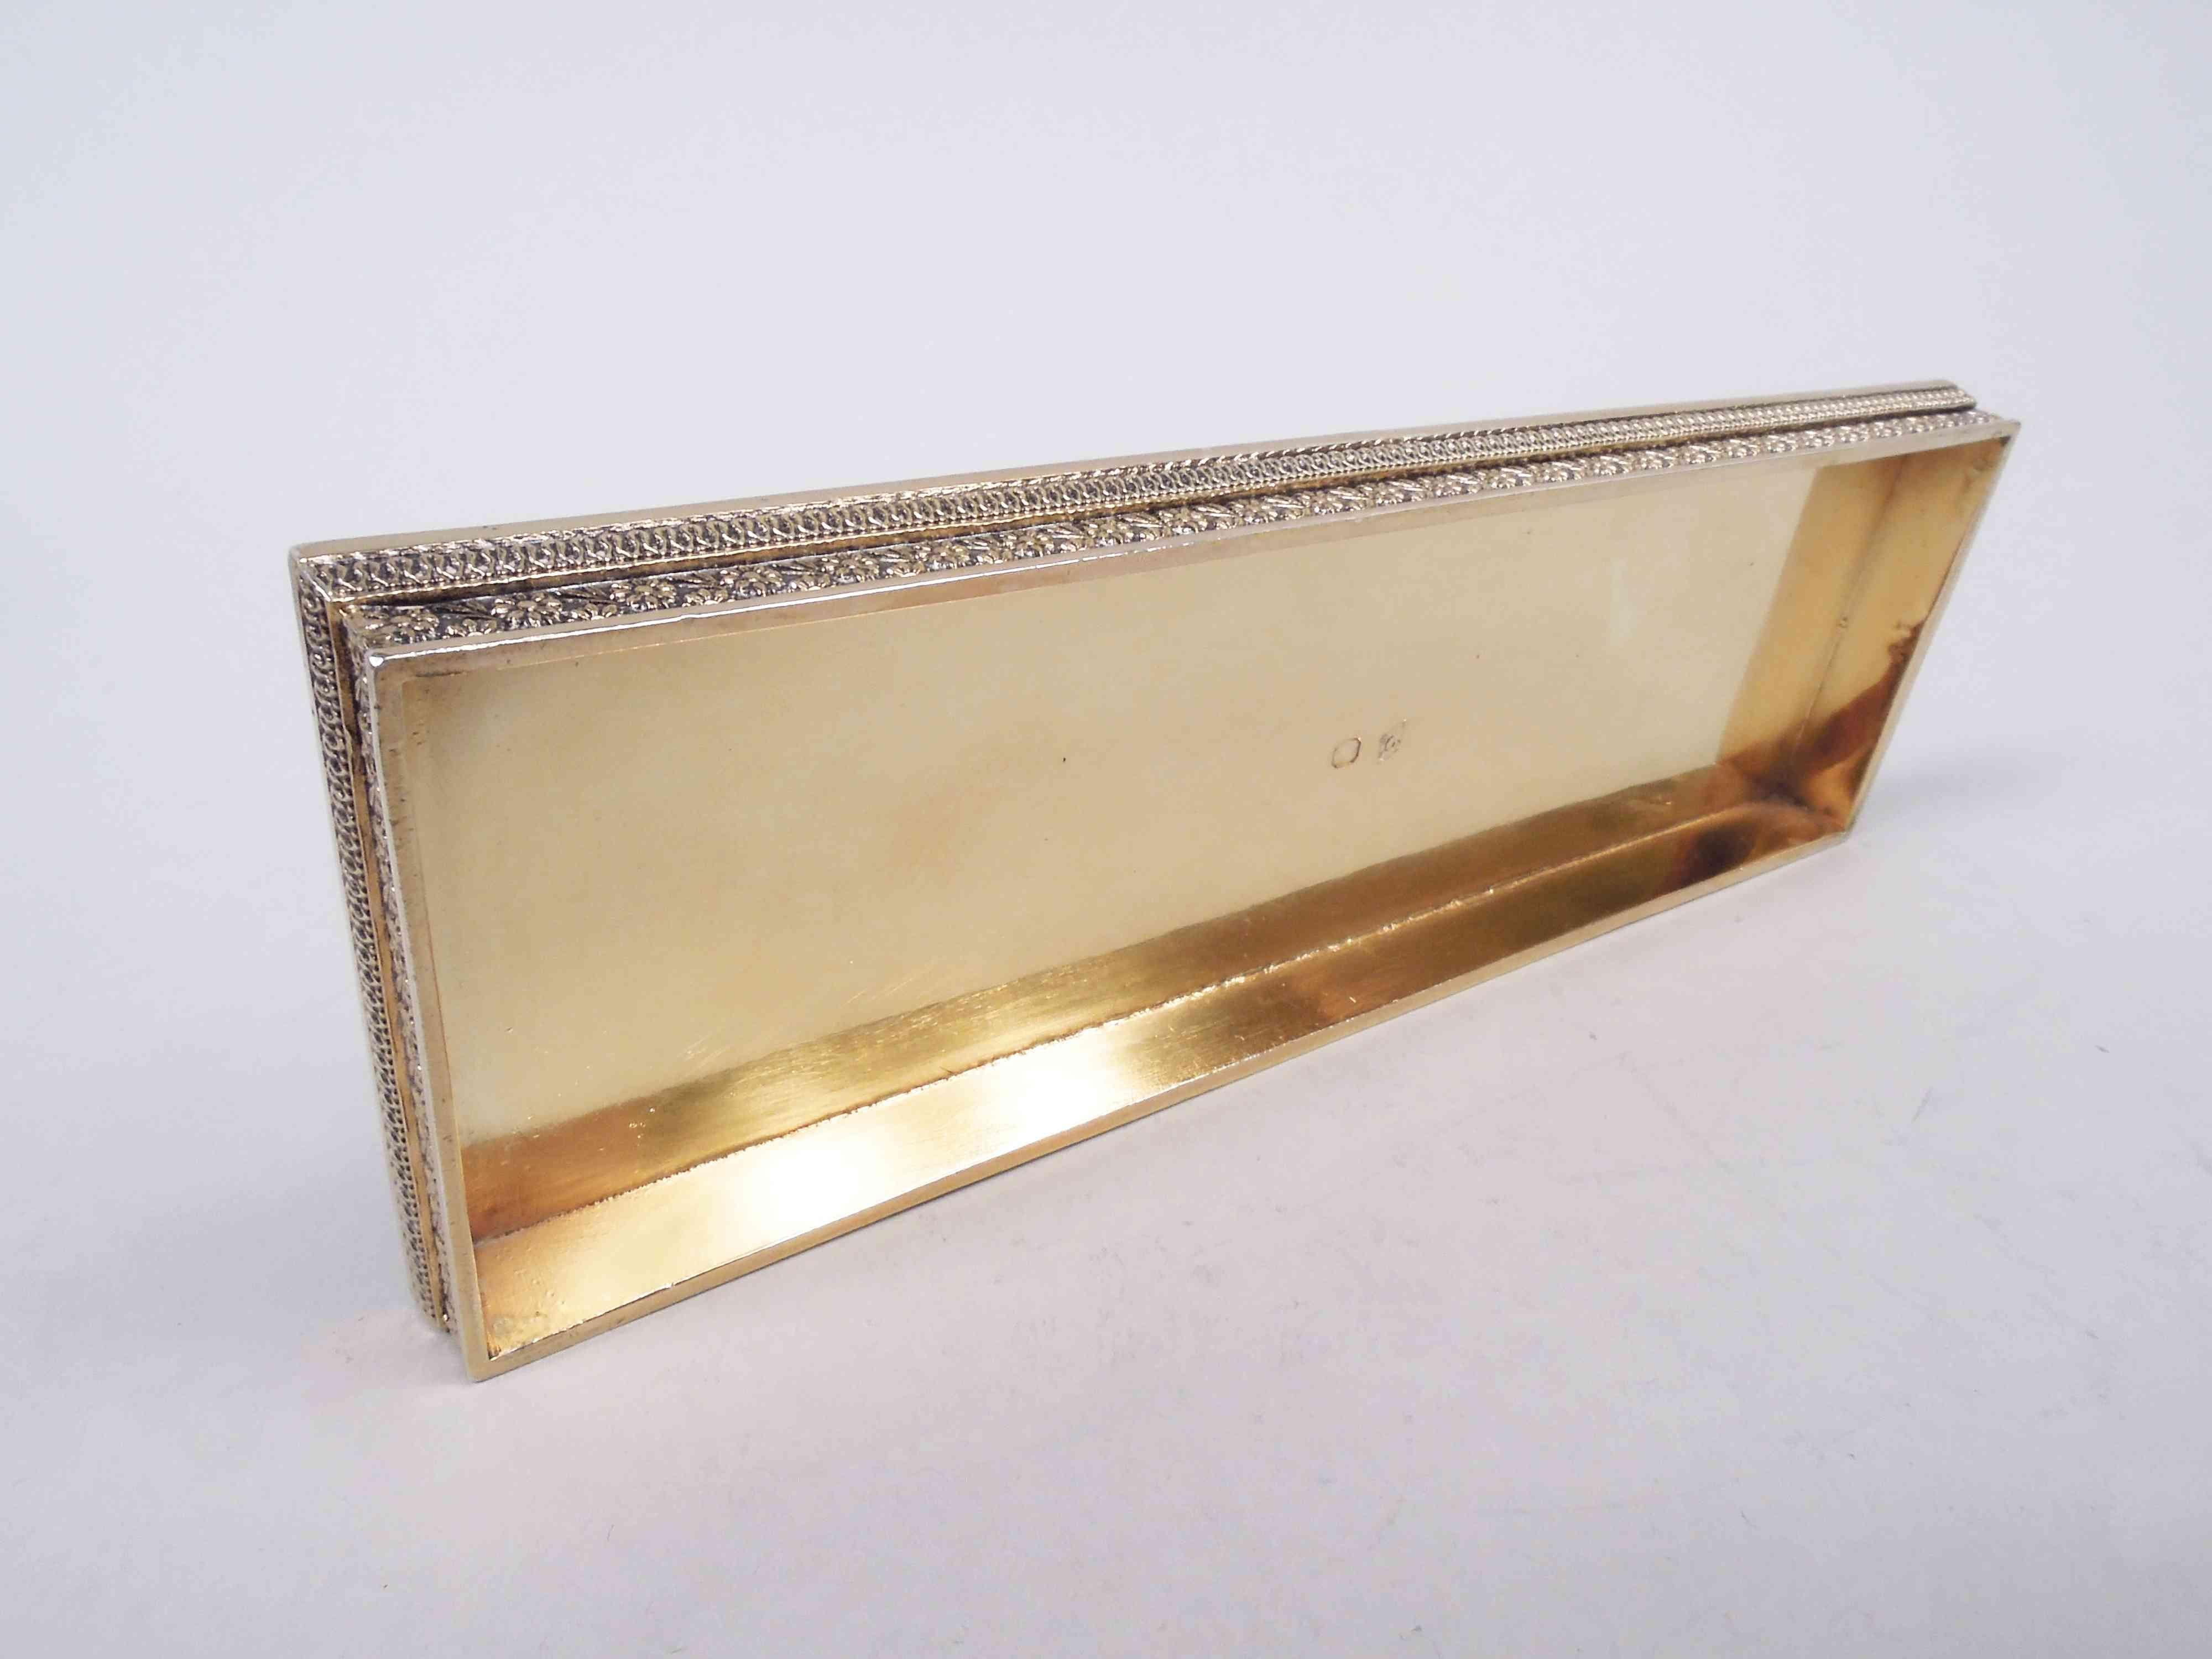 Odiot French Restauration Return-of-the-Bourbons Silver Gilt Box For Sale 6